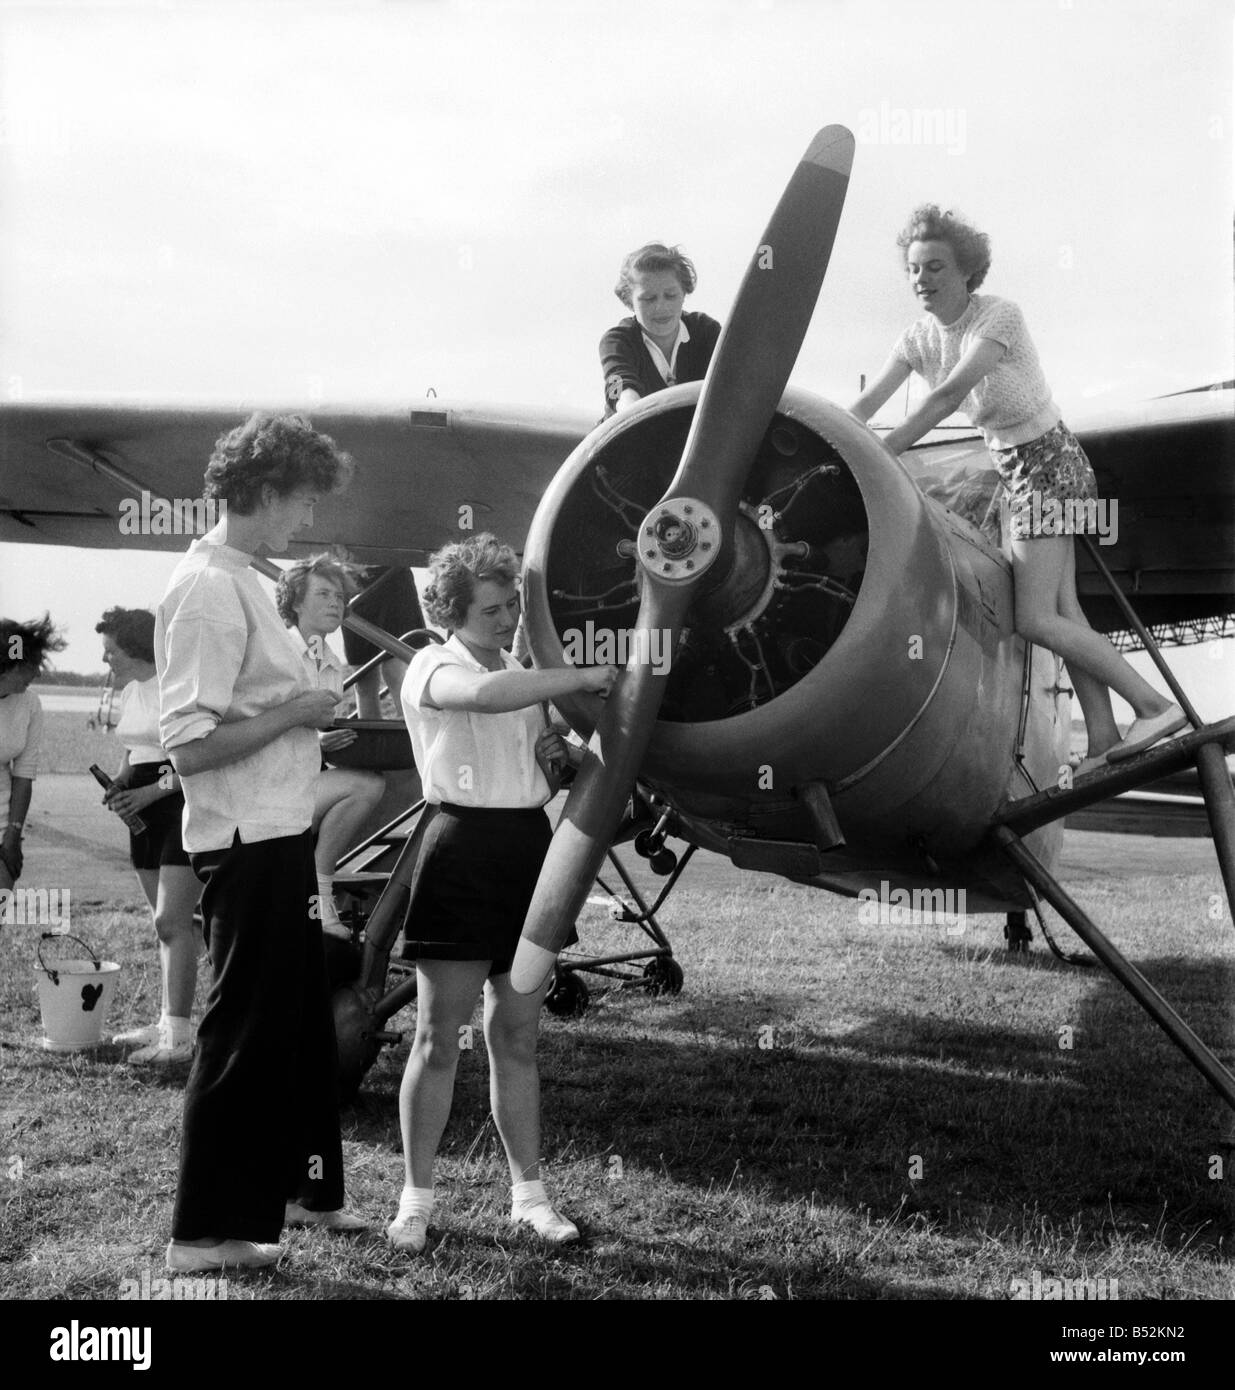 W. J. A. C. girls seen here servicing plane. August 1952 C4029 Stock Photo